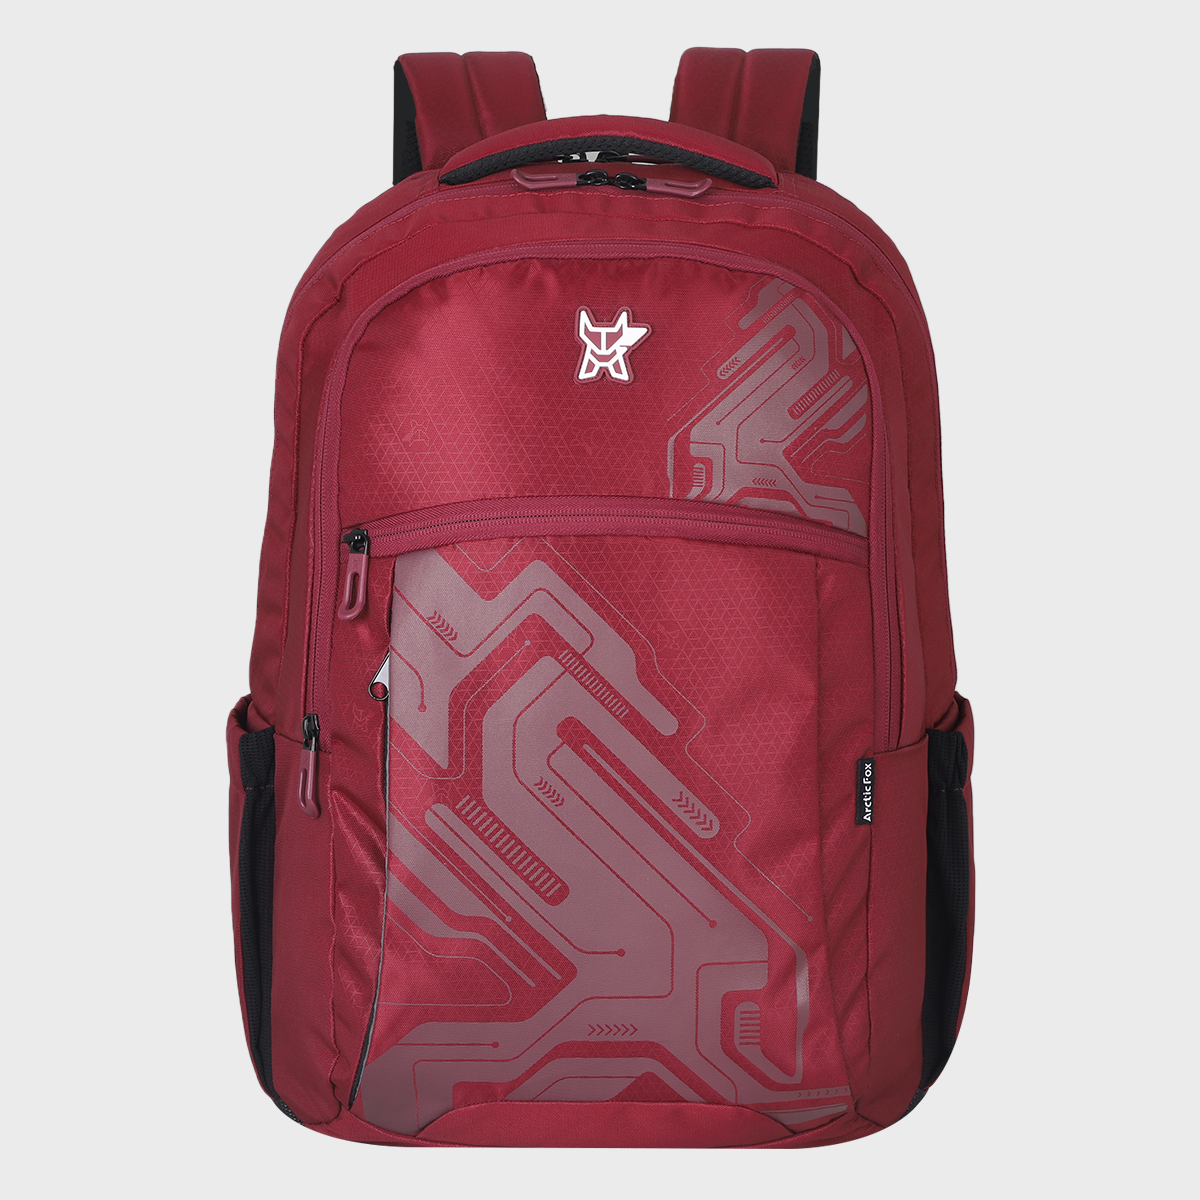 Arctic Fox Cyber Smooth Tawny Port Laptop Backpack